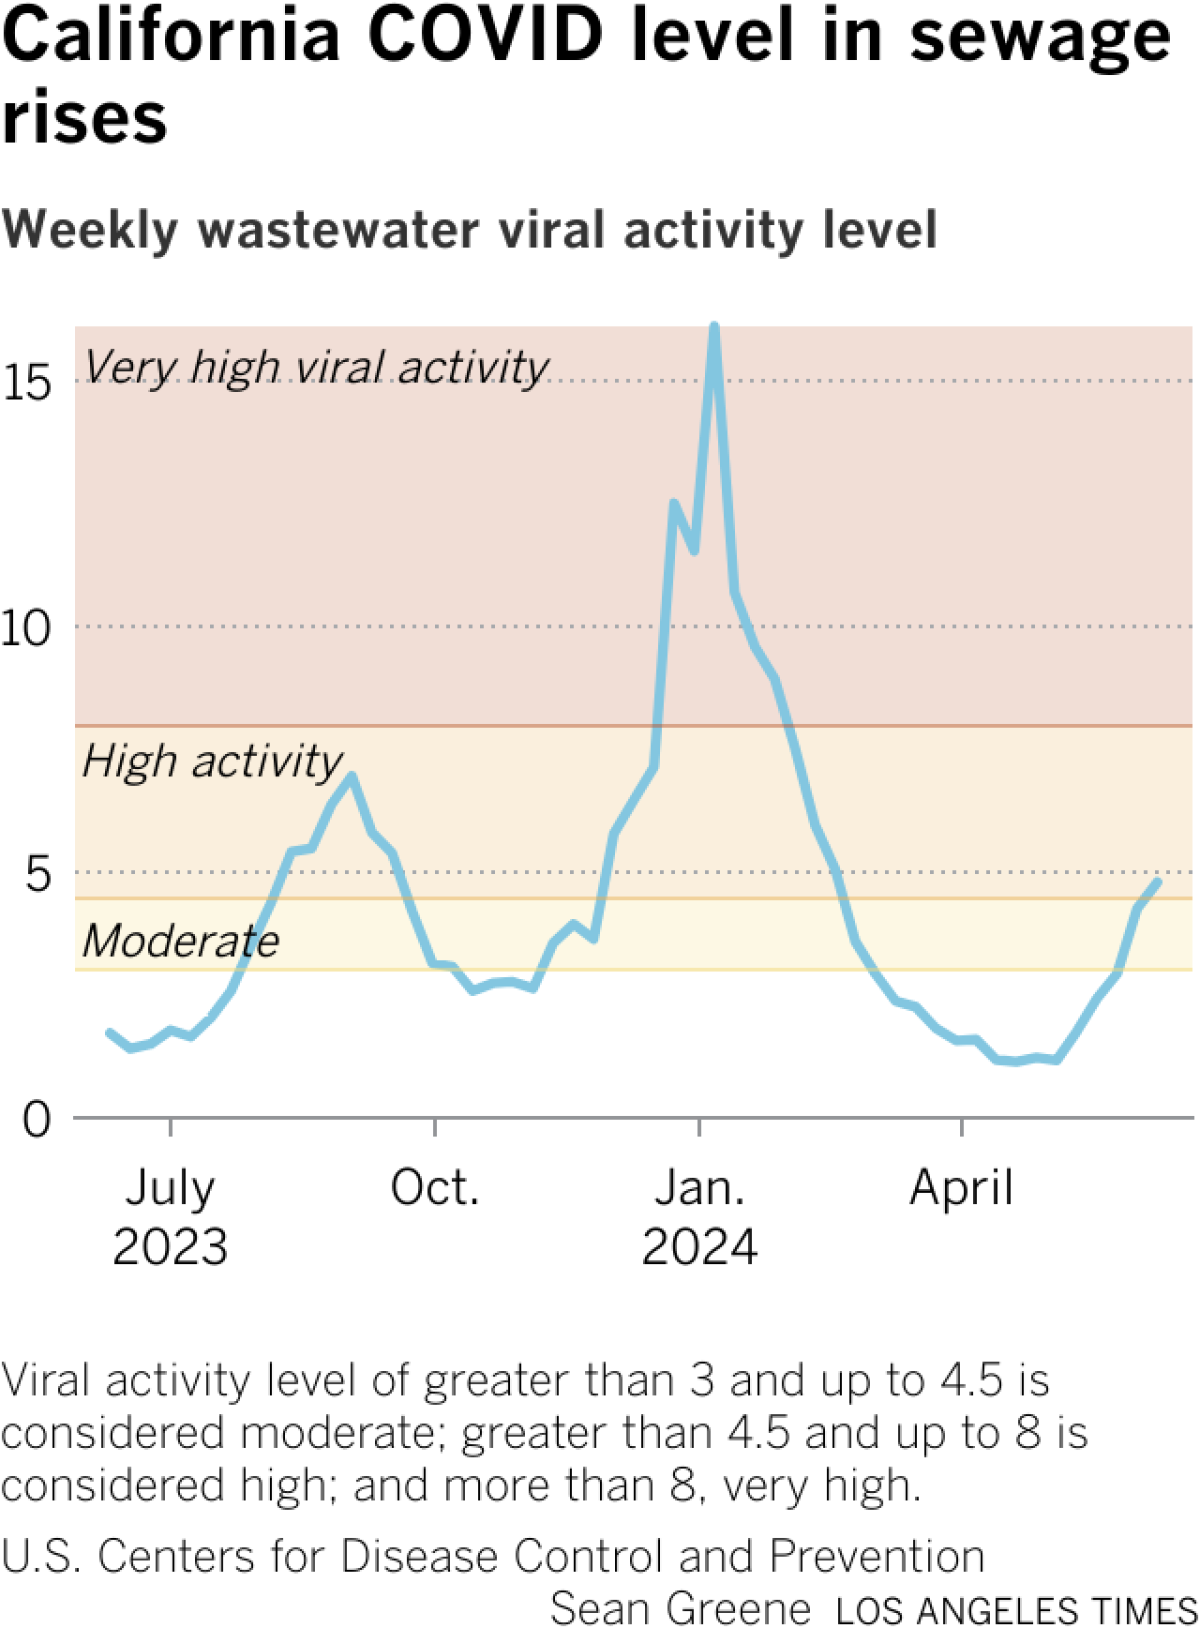 The line graph shows that viral activity in wastewater has been rising again since May. The previous spike was in January.